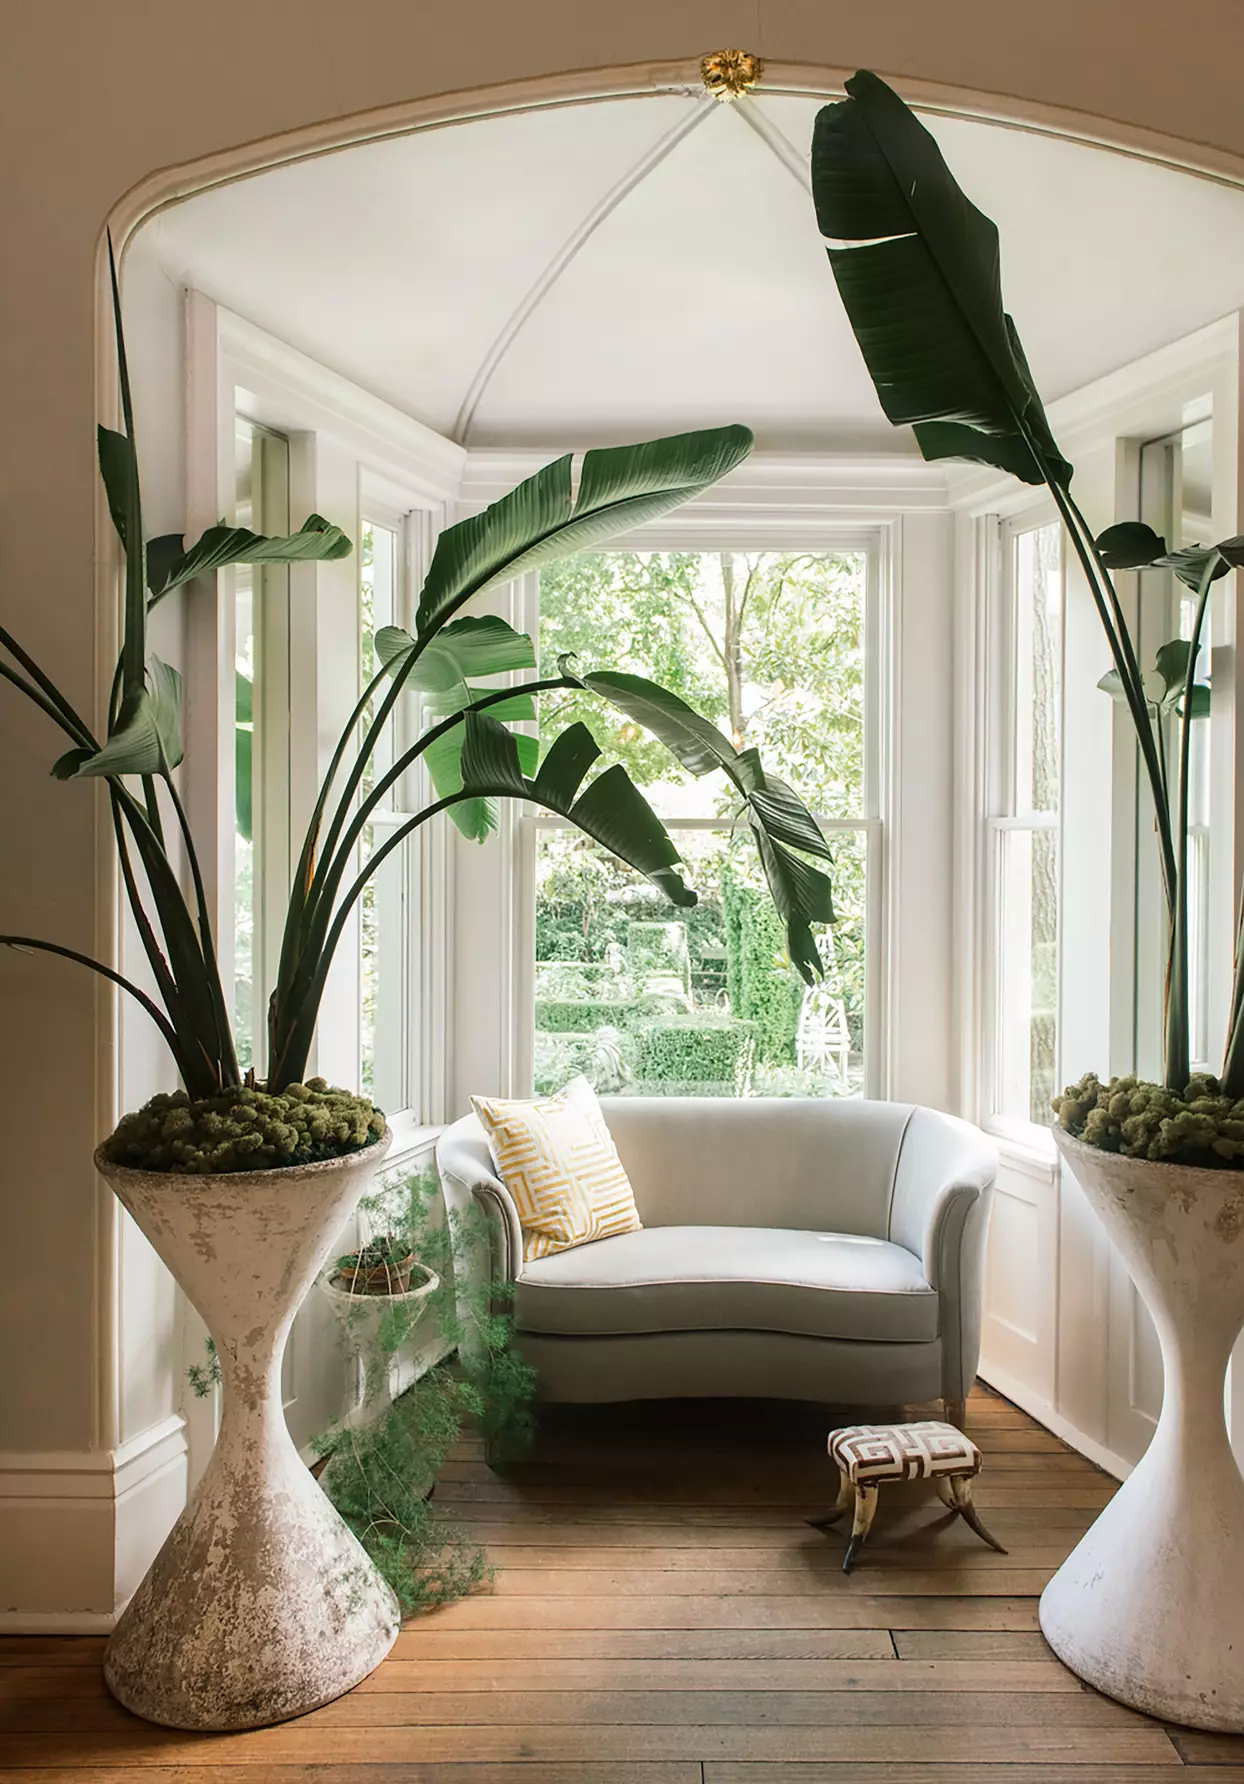 Discover the benefits of Biophilic Interior Design, an innovative approach that connects us with nature, promoting wellness and sustainability in our living spaces.